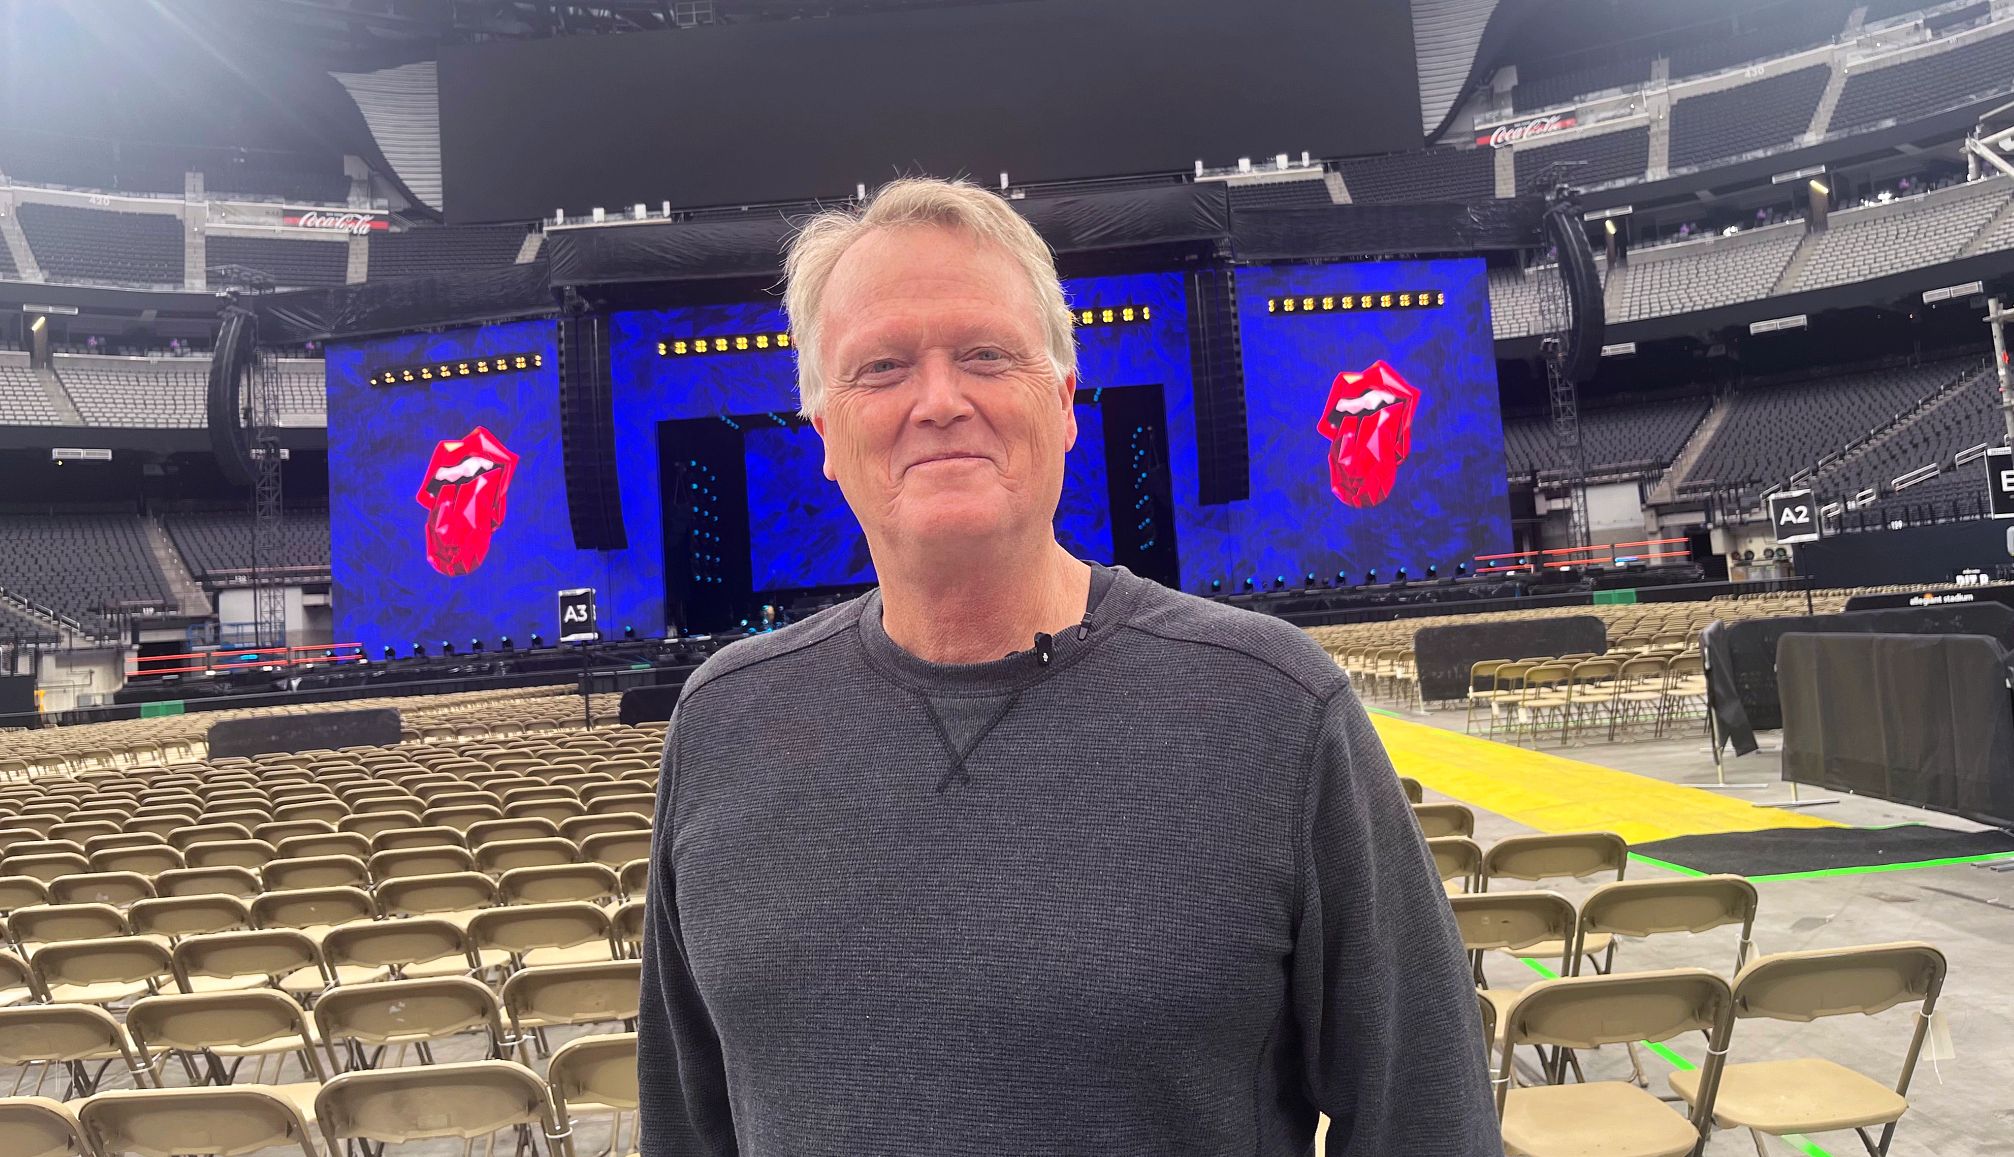 The Rolling Stones Production director Dale Skjerseth